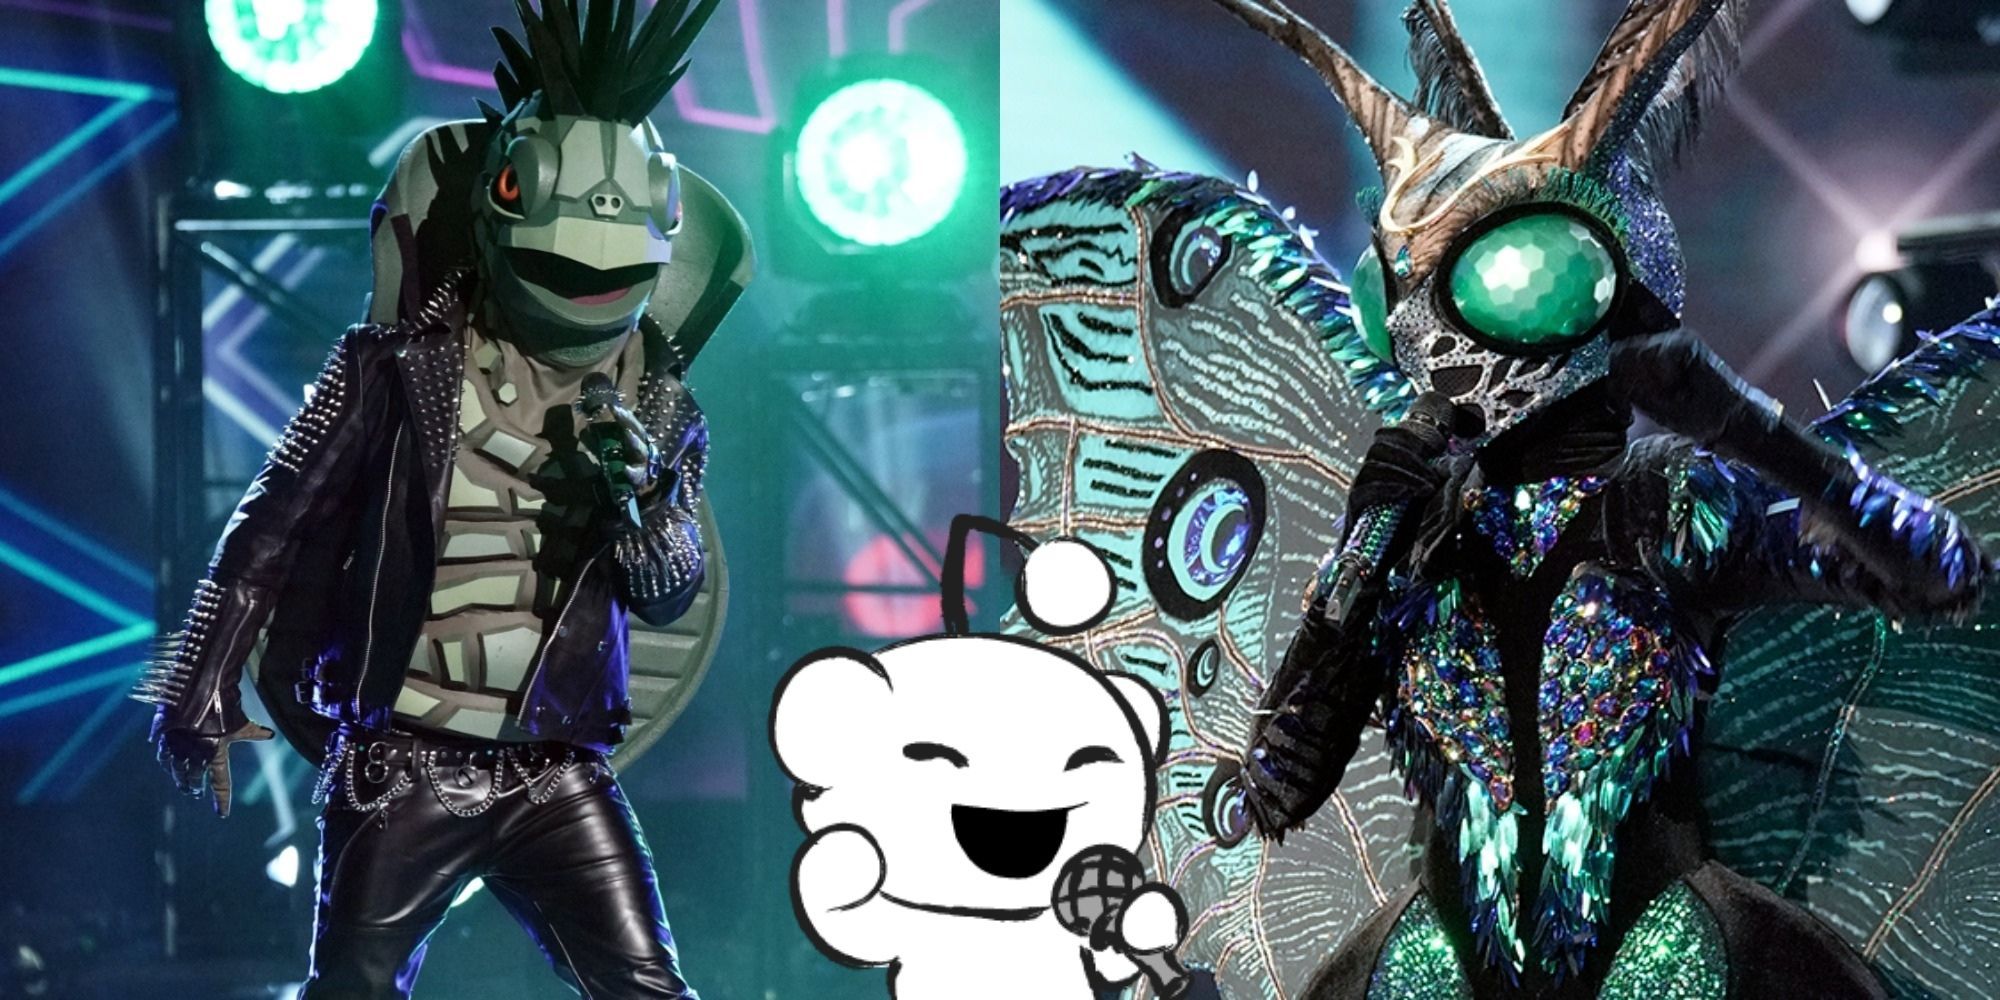 Split image showing the Turtle and Buttergly singing on The Masked Singer, and Snoo from Reddit with a microphone